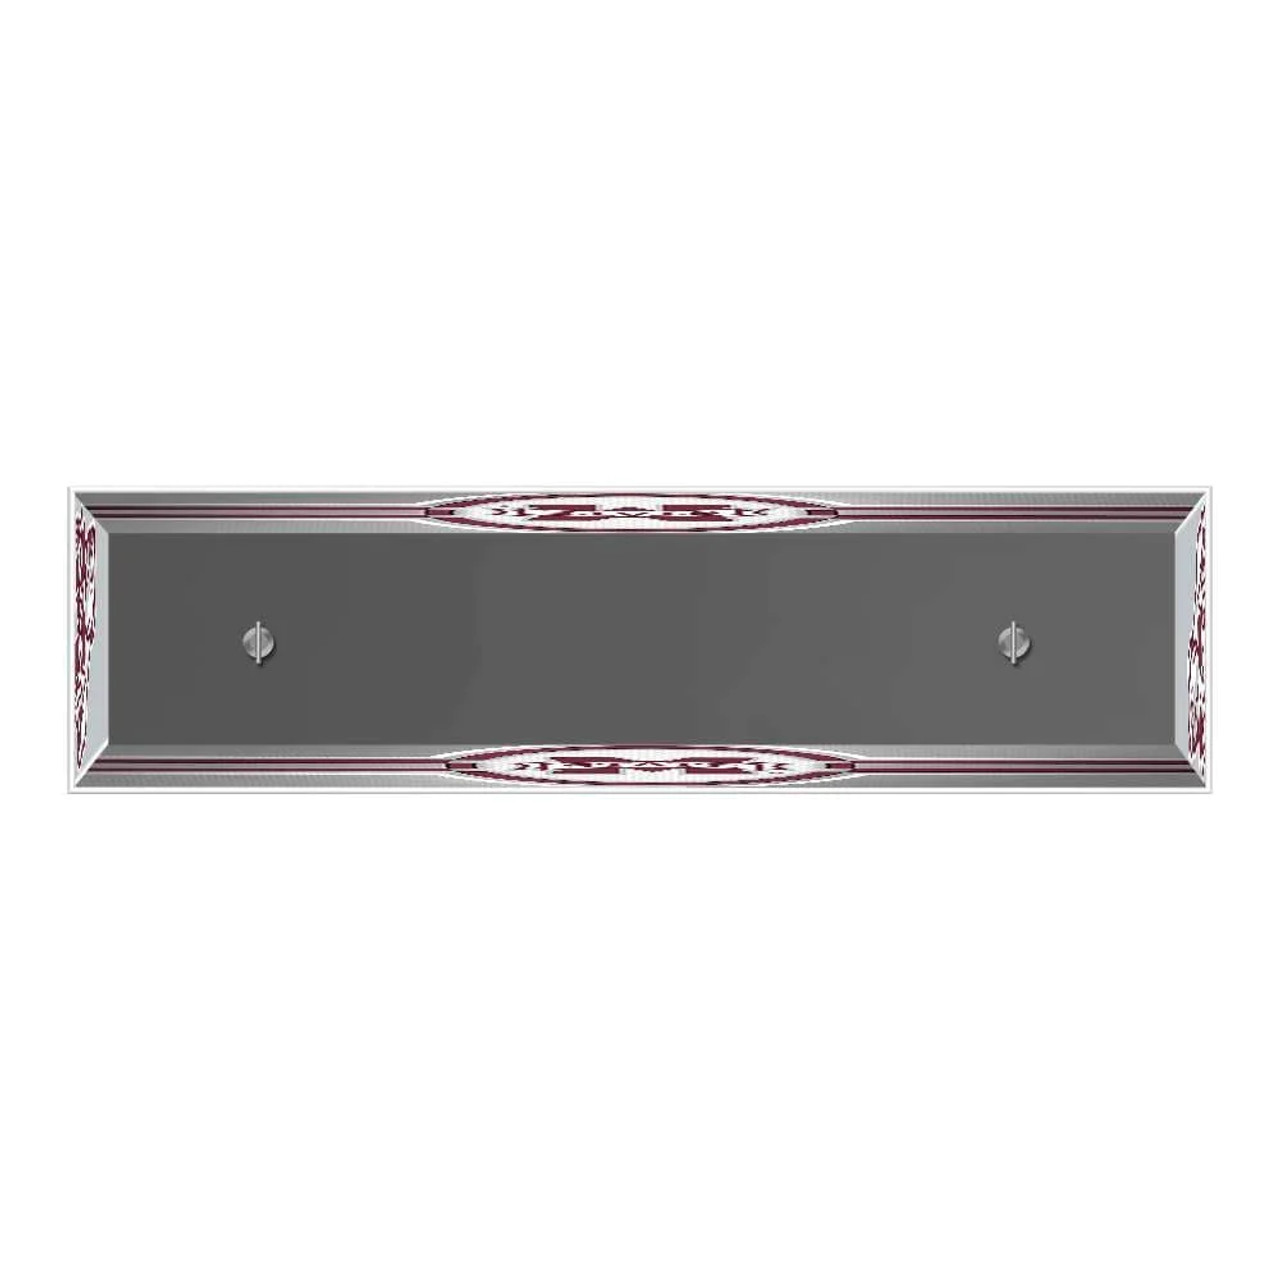 Mississippi State Bulldogs: Edge Glow "A" Pool Table Light